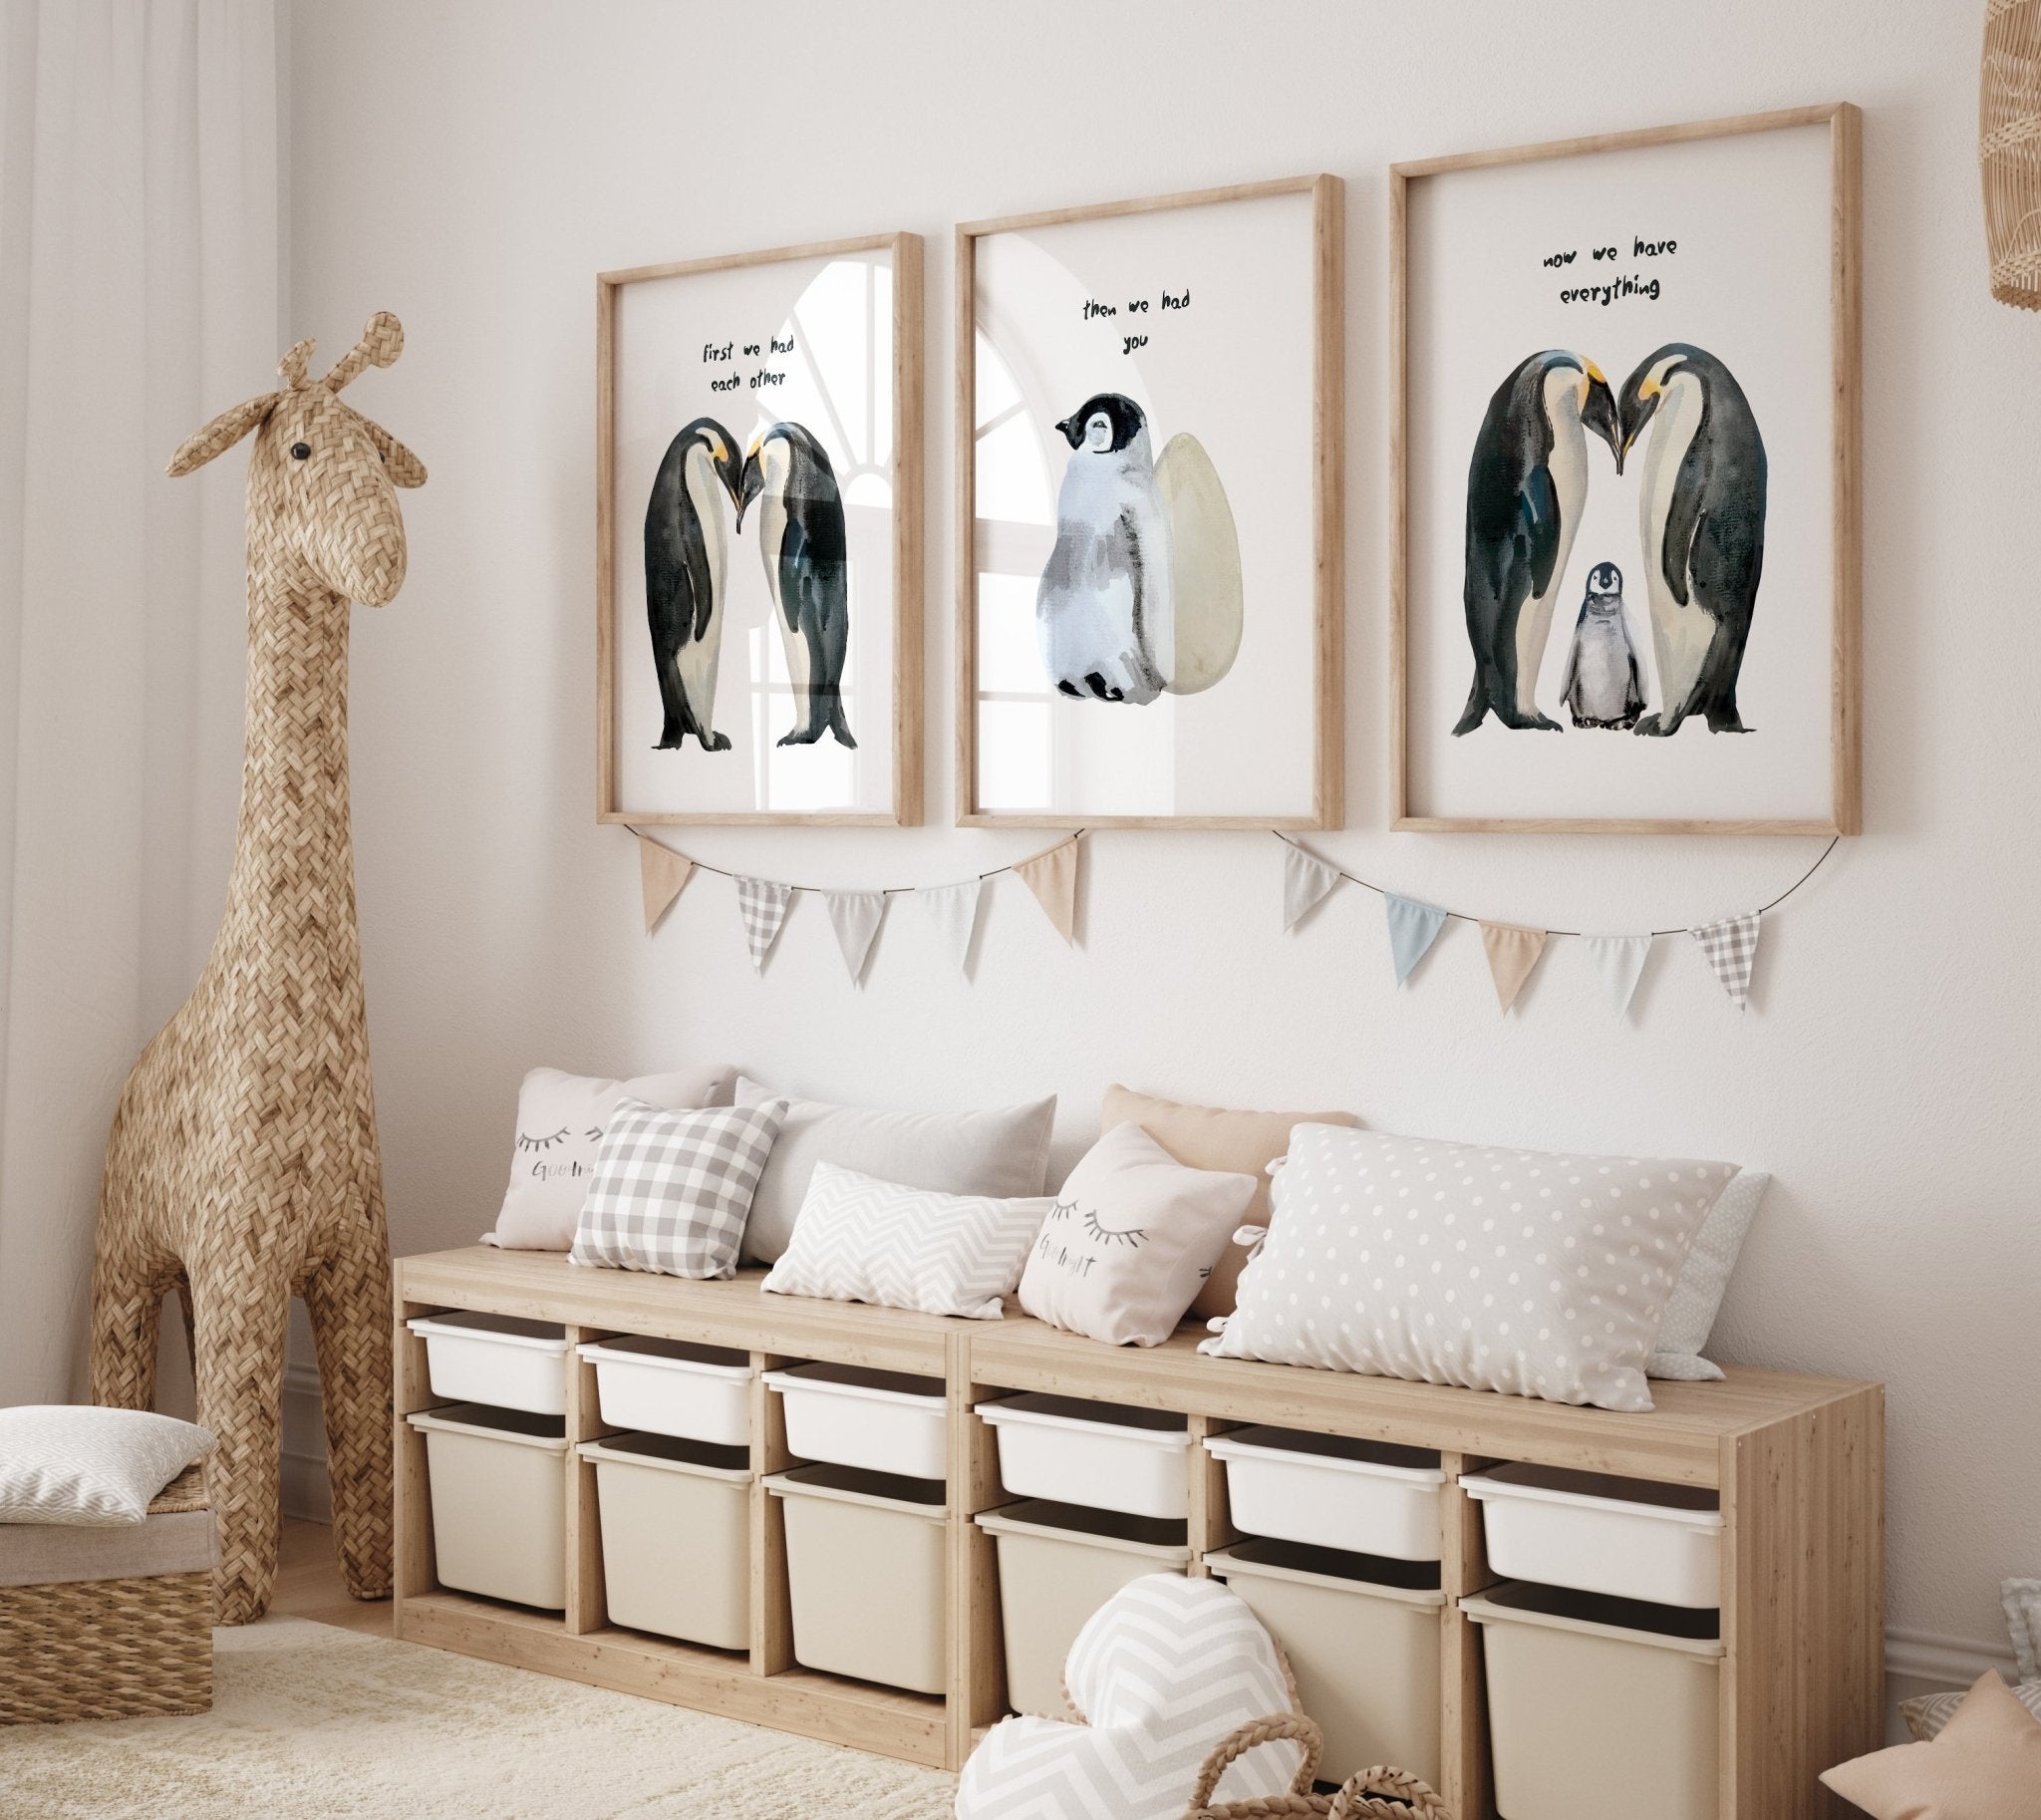 Penguins 'First We had Each Other' Print Set of 3